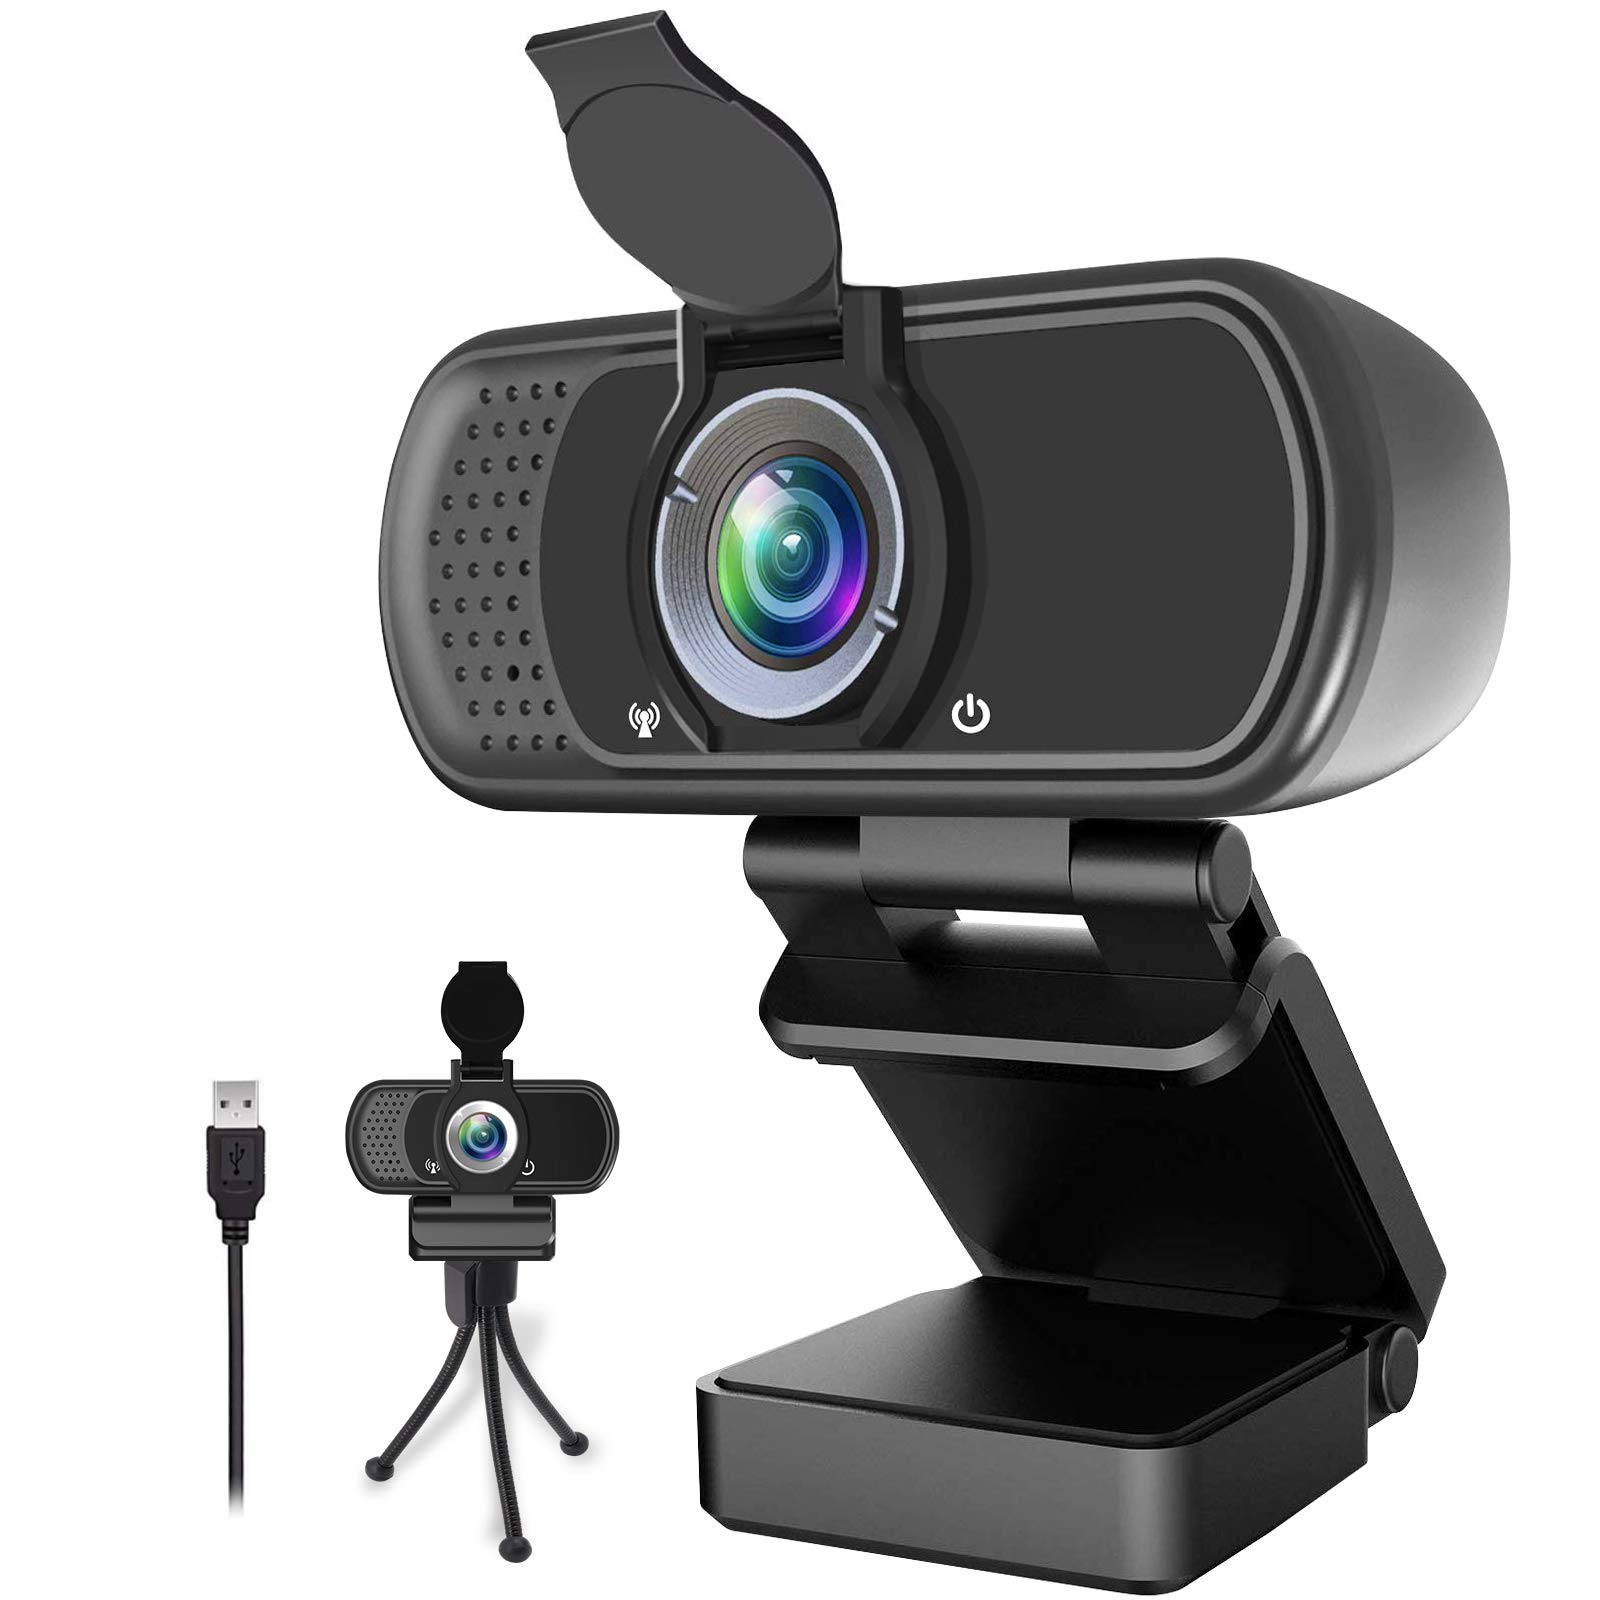 Mua 1080P Webcam,Live Streaming Web Camera With Stereo Microphone, Desktop  Or Laptop Usb Webcam With 110 Degree View Angle, Hd N5 Webcam For Video  Calling, Recording, Conferencing, Streaming, Gaming Trên Amazon Mỹ